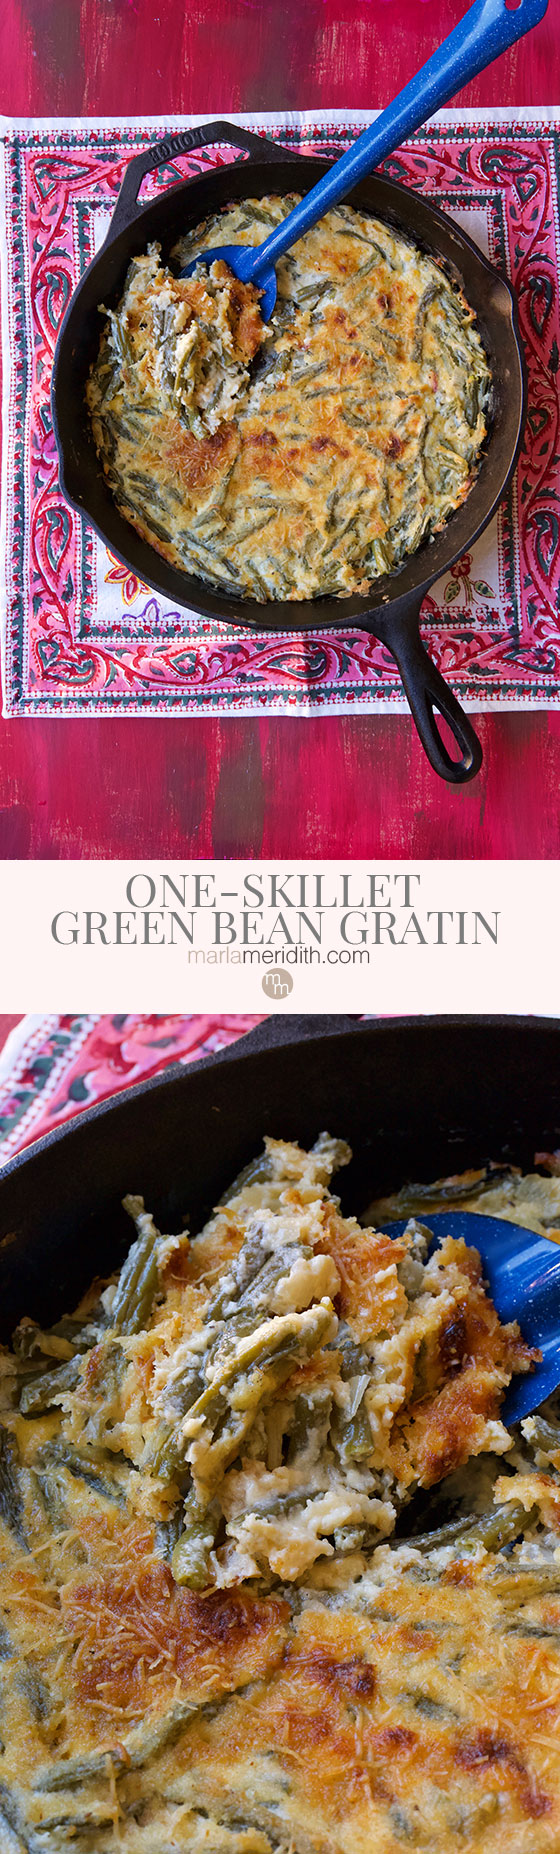 We love this One-Skillet Green Bean Gratin recipe, a delicious holiday side dish! Simple to prepare and only one pot to clean up makes this dish dreamy! MarlaMeridith.com